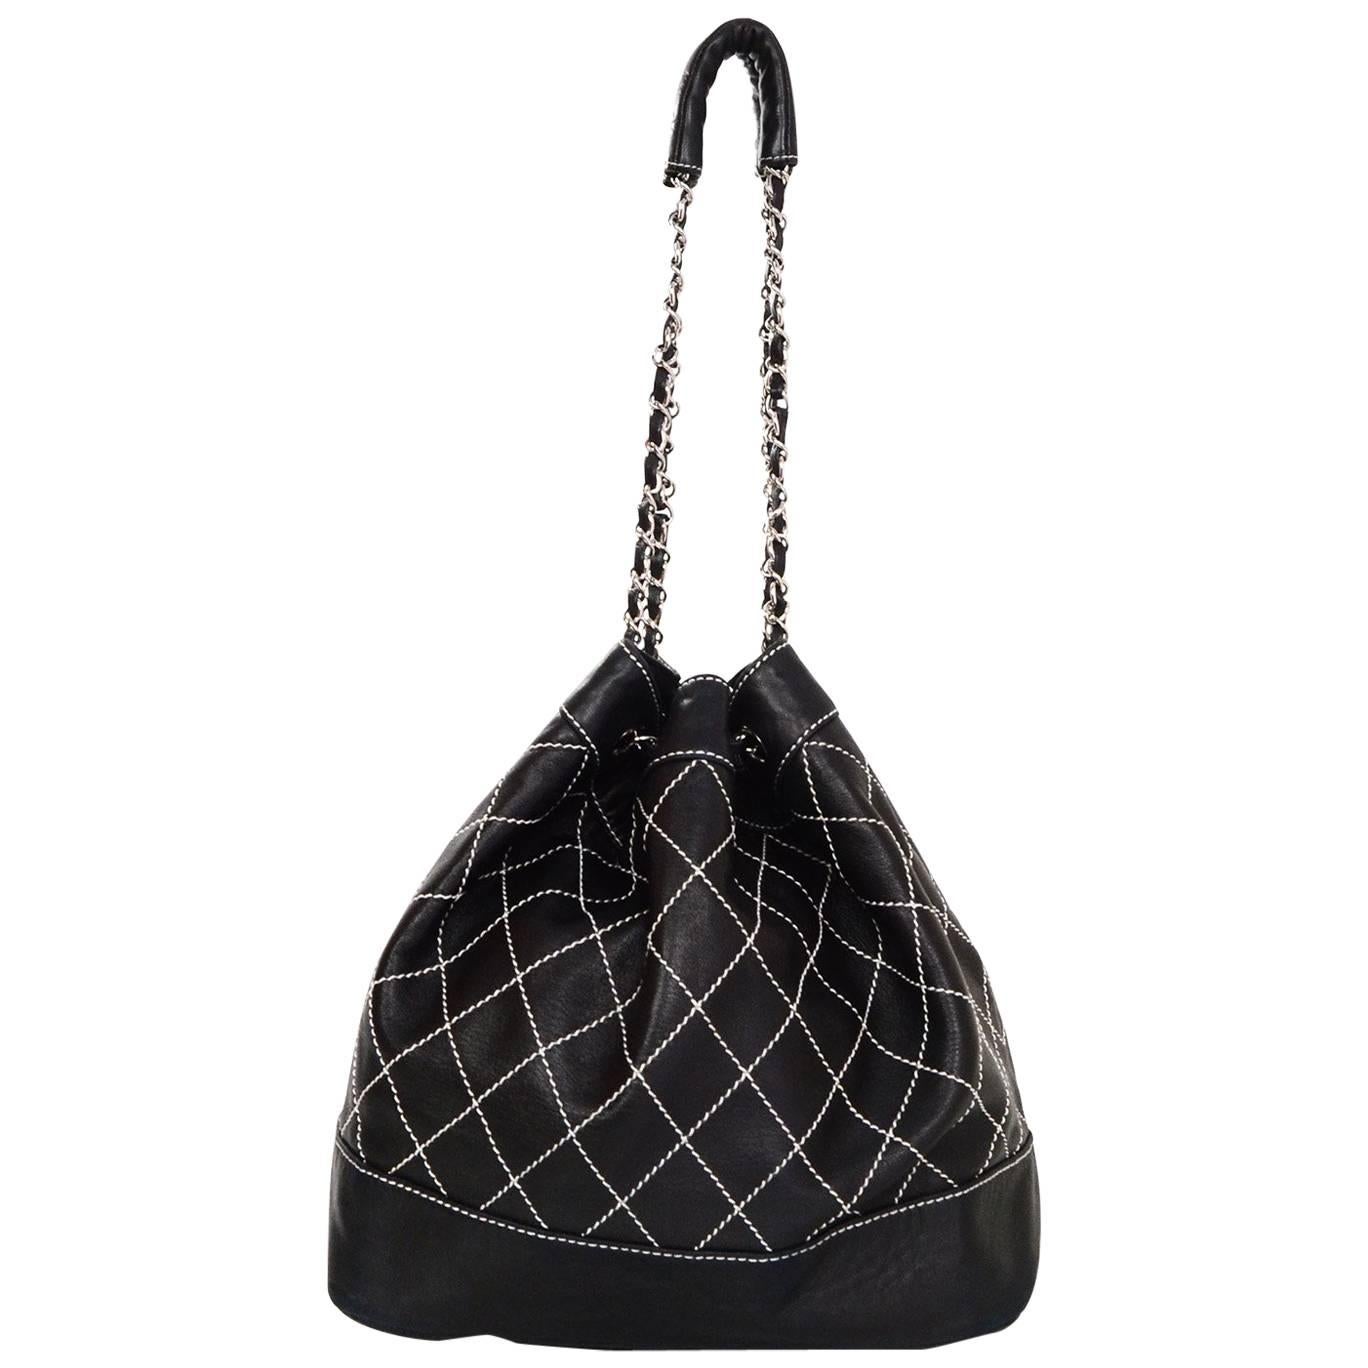 Chanel Black Leather Contrast Quilted Surpique Bucket Bag